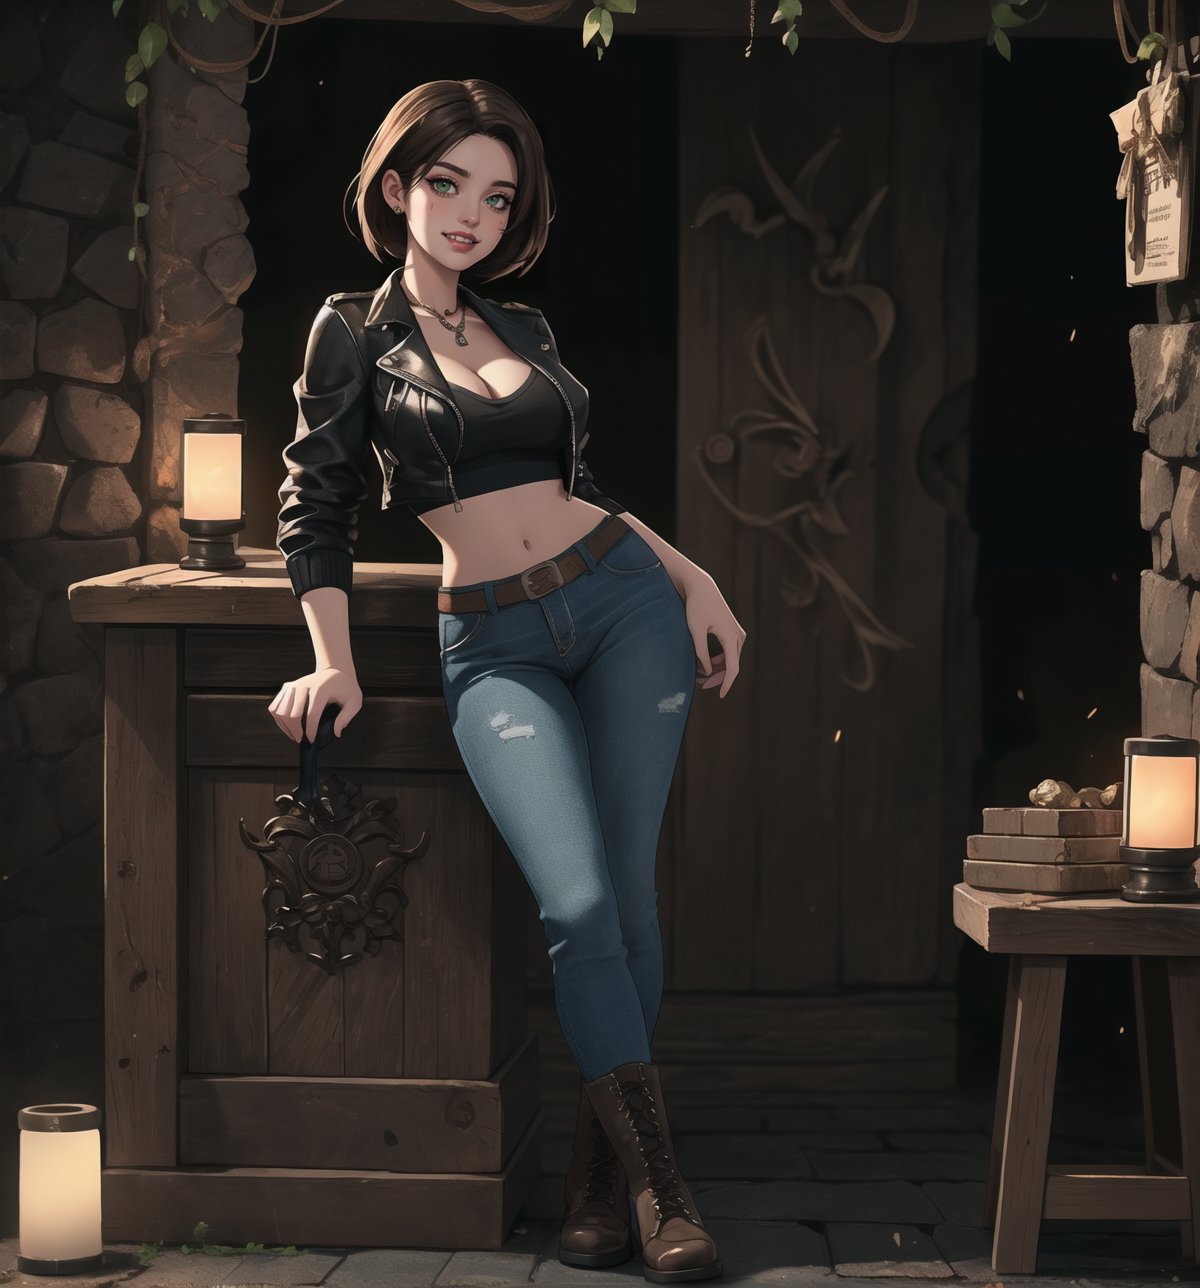 An ultra-detailed 16K masterpiece of horror and realism, rendered in ultra-high resolution with stunning graphical detail. | Jill Valentine, a beautiful 28-year-old woman, is dressed in a sexy and modern detective outfit consisting of a leather jacket, jeans, black boots and a white shirt. Her short brown hair is styled into a bob, with a loose strand of hair falling in front. Her green eyes look out at the viewer, ((smiling seductively and showing her teeth)), with red lipstick and war paint on her face. It is located in a macabre cave, with ancient temple structures, rock structures, marble structures and wooden structures all around. Lamps illuminate the environment, creating ominous shadows on the cave walls. The air is cold and damp, with a musty, dusty smell coming from deep within the cave. | The image highlights Jill Valentine's sensual figure and the frightening elements of the macabre cave. The ancient temple structures, rock structures, marble structures and wooden structures create a dark and spooky environment. The lighting from the lanterns creates dramatic shadows and highlights the details of the scene. | Soft, shadowy lighting effects create a tense, fear-filled atmosphere, while rough, detailed textures on structures and costume add realism to the image. | A sensual and frightening scene of Jill Valentine, a beautiful woman dressed as a sexy detective in a macabre cave, exploring themes of horror, seduction and survival. | (((The image reveals a full-body shot as Jill Valentine assumes a sensual pose, engagingly leaning against a structure within the scene in an exciting manner. She takes on a sensual pose as she interacts, boldly leaning on a structure, leaning back and boldly throwing herself onto the structure, reclining back in an exhilarating way.))). | ((((full-body shot)))), ((perfect pose)), ((perfect limbs, perfect fingers, better hands, perfect hands, hands))++, ((perfect legs, perfect feet))++, ((huge breasts)), ((perfect design)), ((perfect composition)), ((very detailed scene, very detailed background, perfect layout, correct imperfections)), Enhance++, Ultra details++, More Detail++